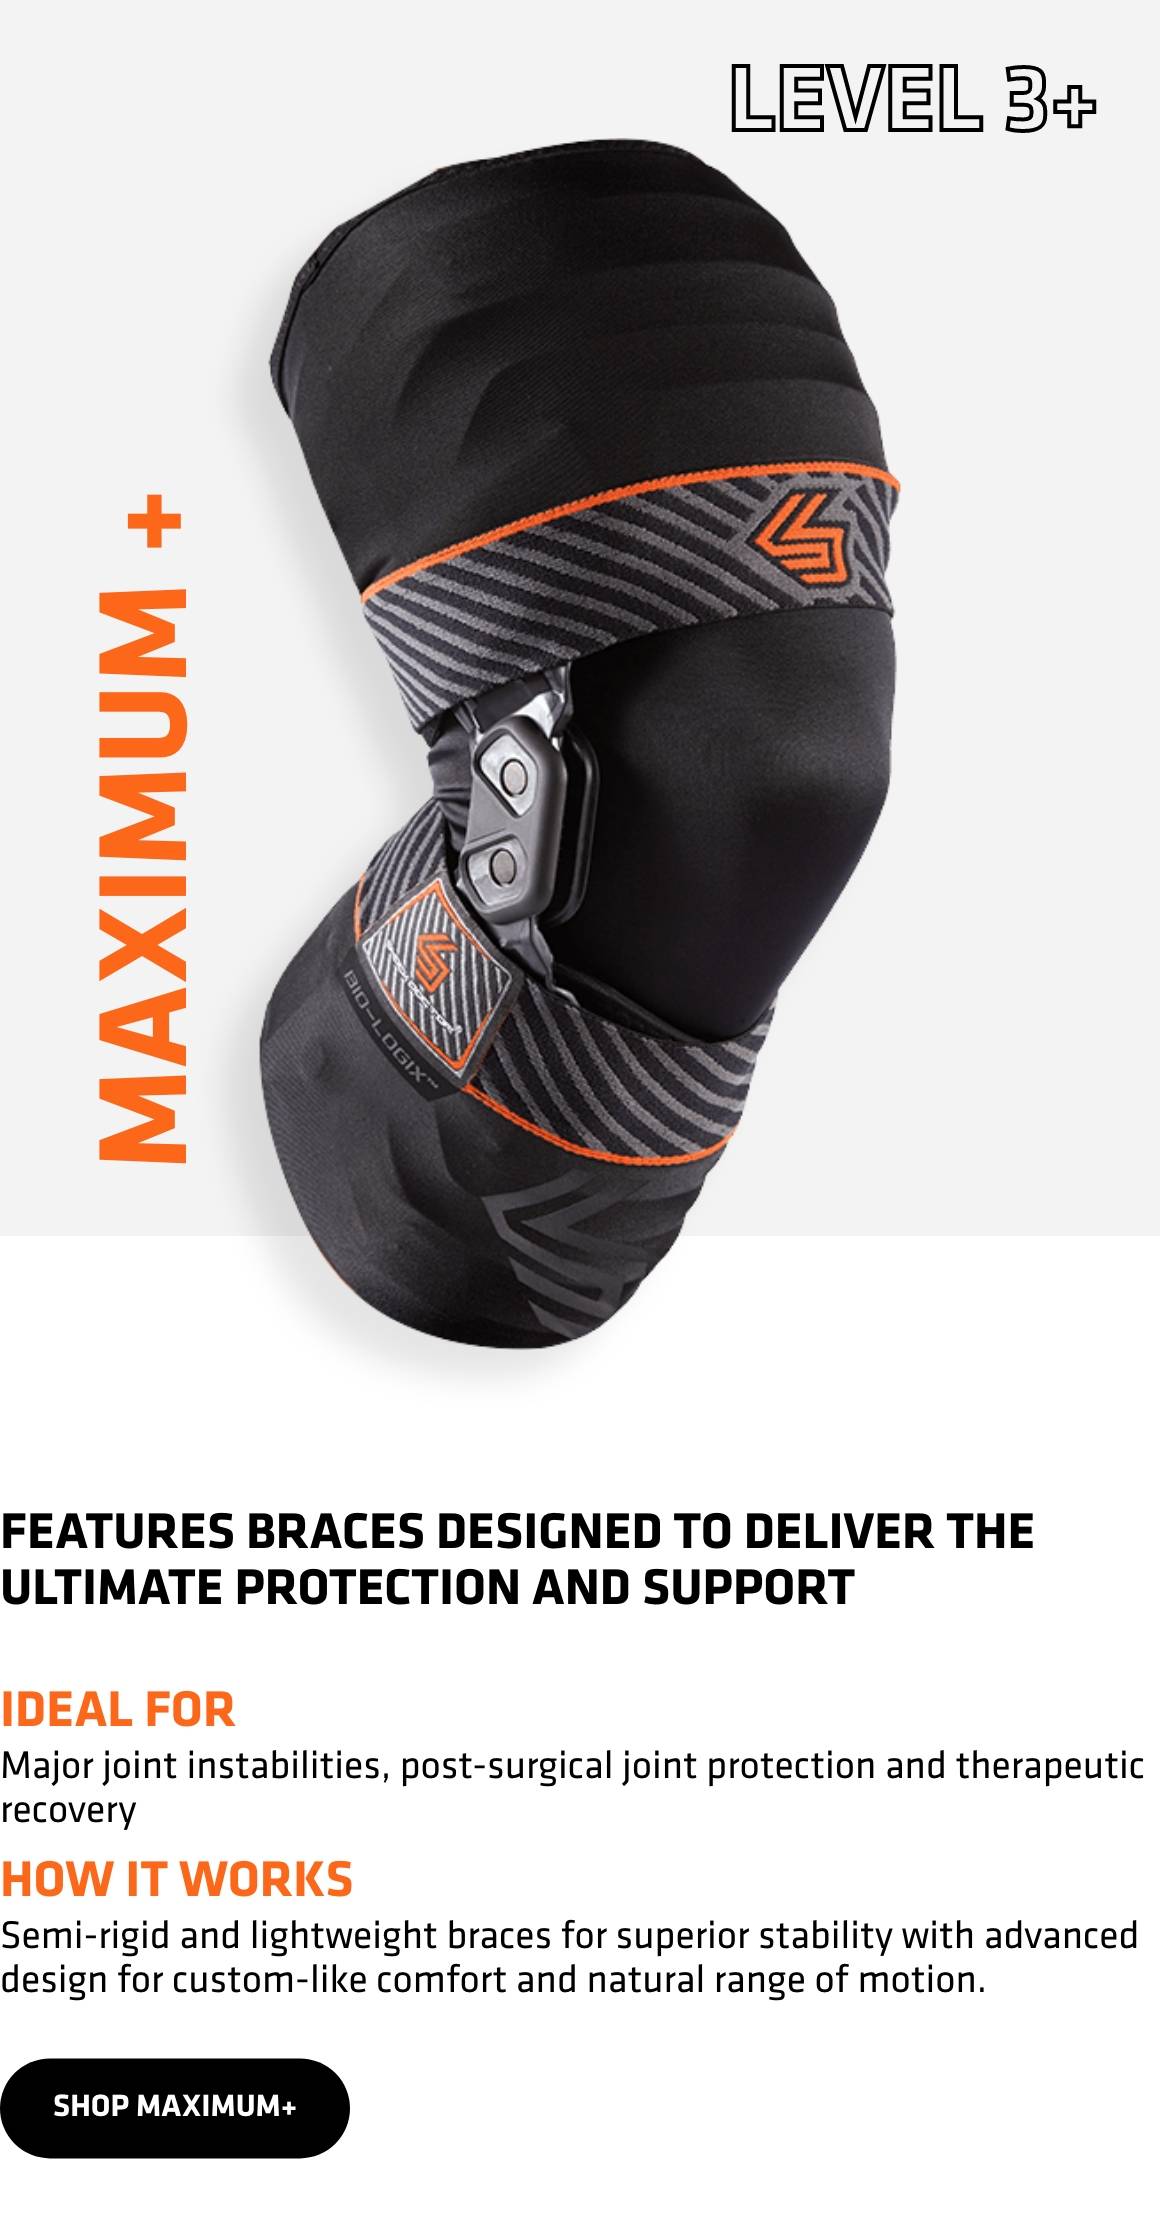 Level 3+ Maximum+. Features braces designed to deliver the ultimate protection and support. Ideal for major joint instabilities, post-surgical joint protection and therapeutic recovery. How it works. Semi-rigid lightweight braces for superior stability and advanced design for custom-like comfort and natural range of motion. SHOP MAXIMUM+